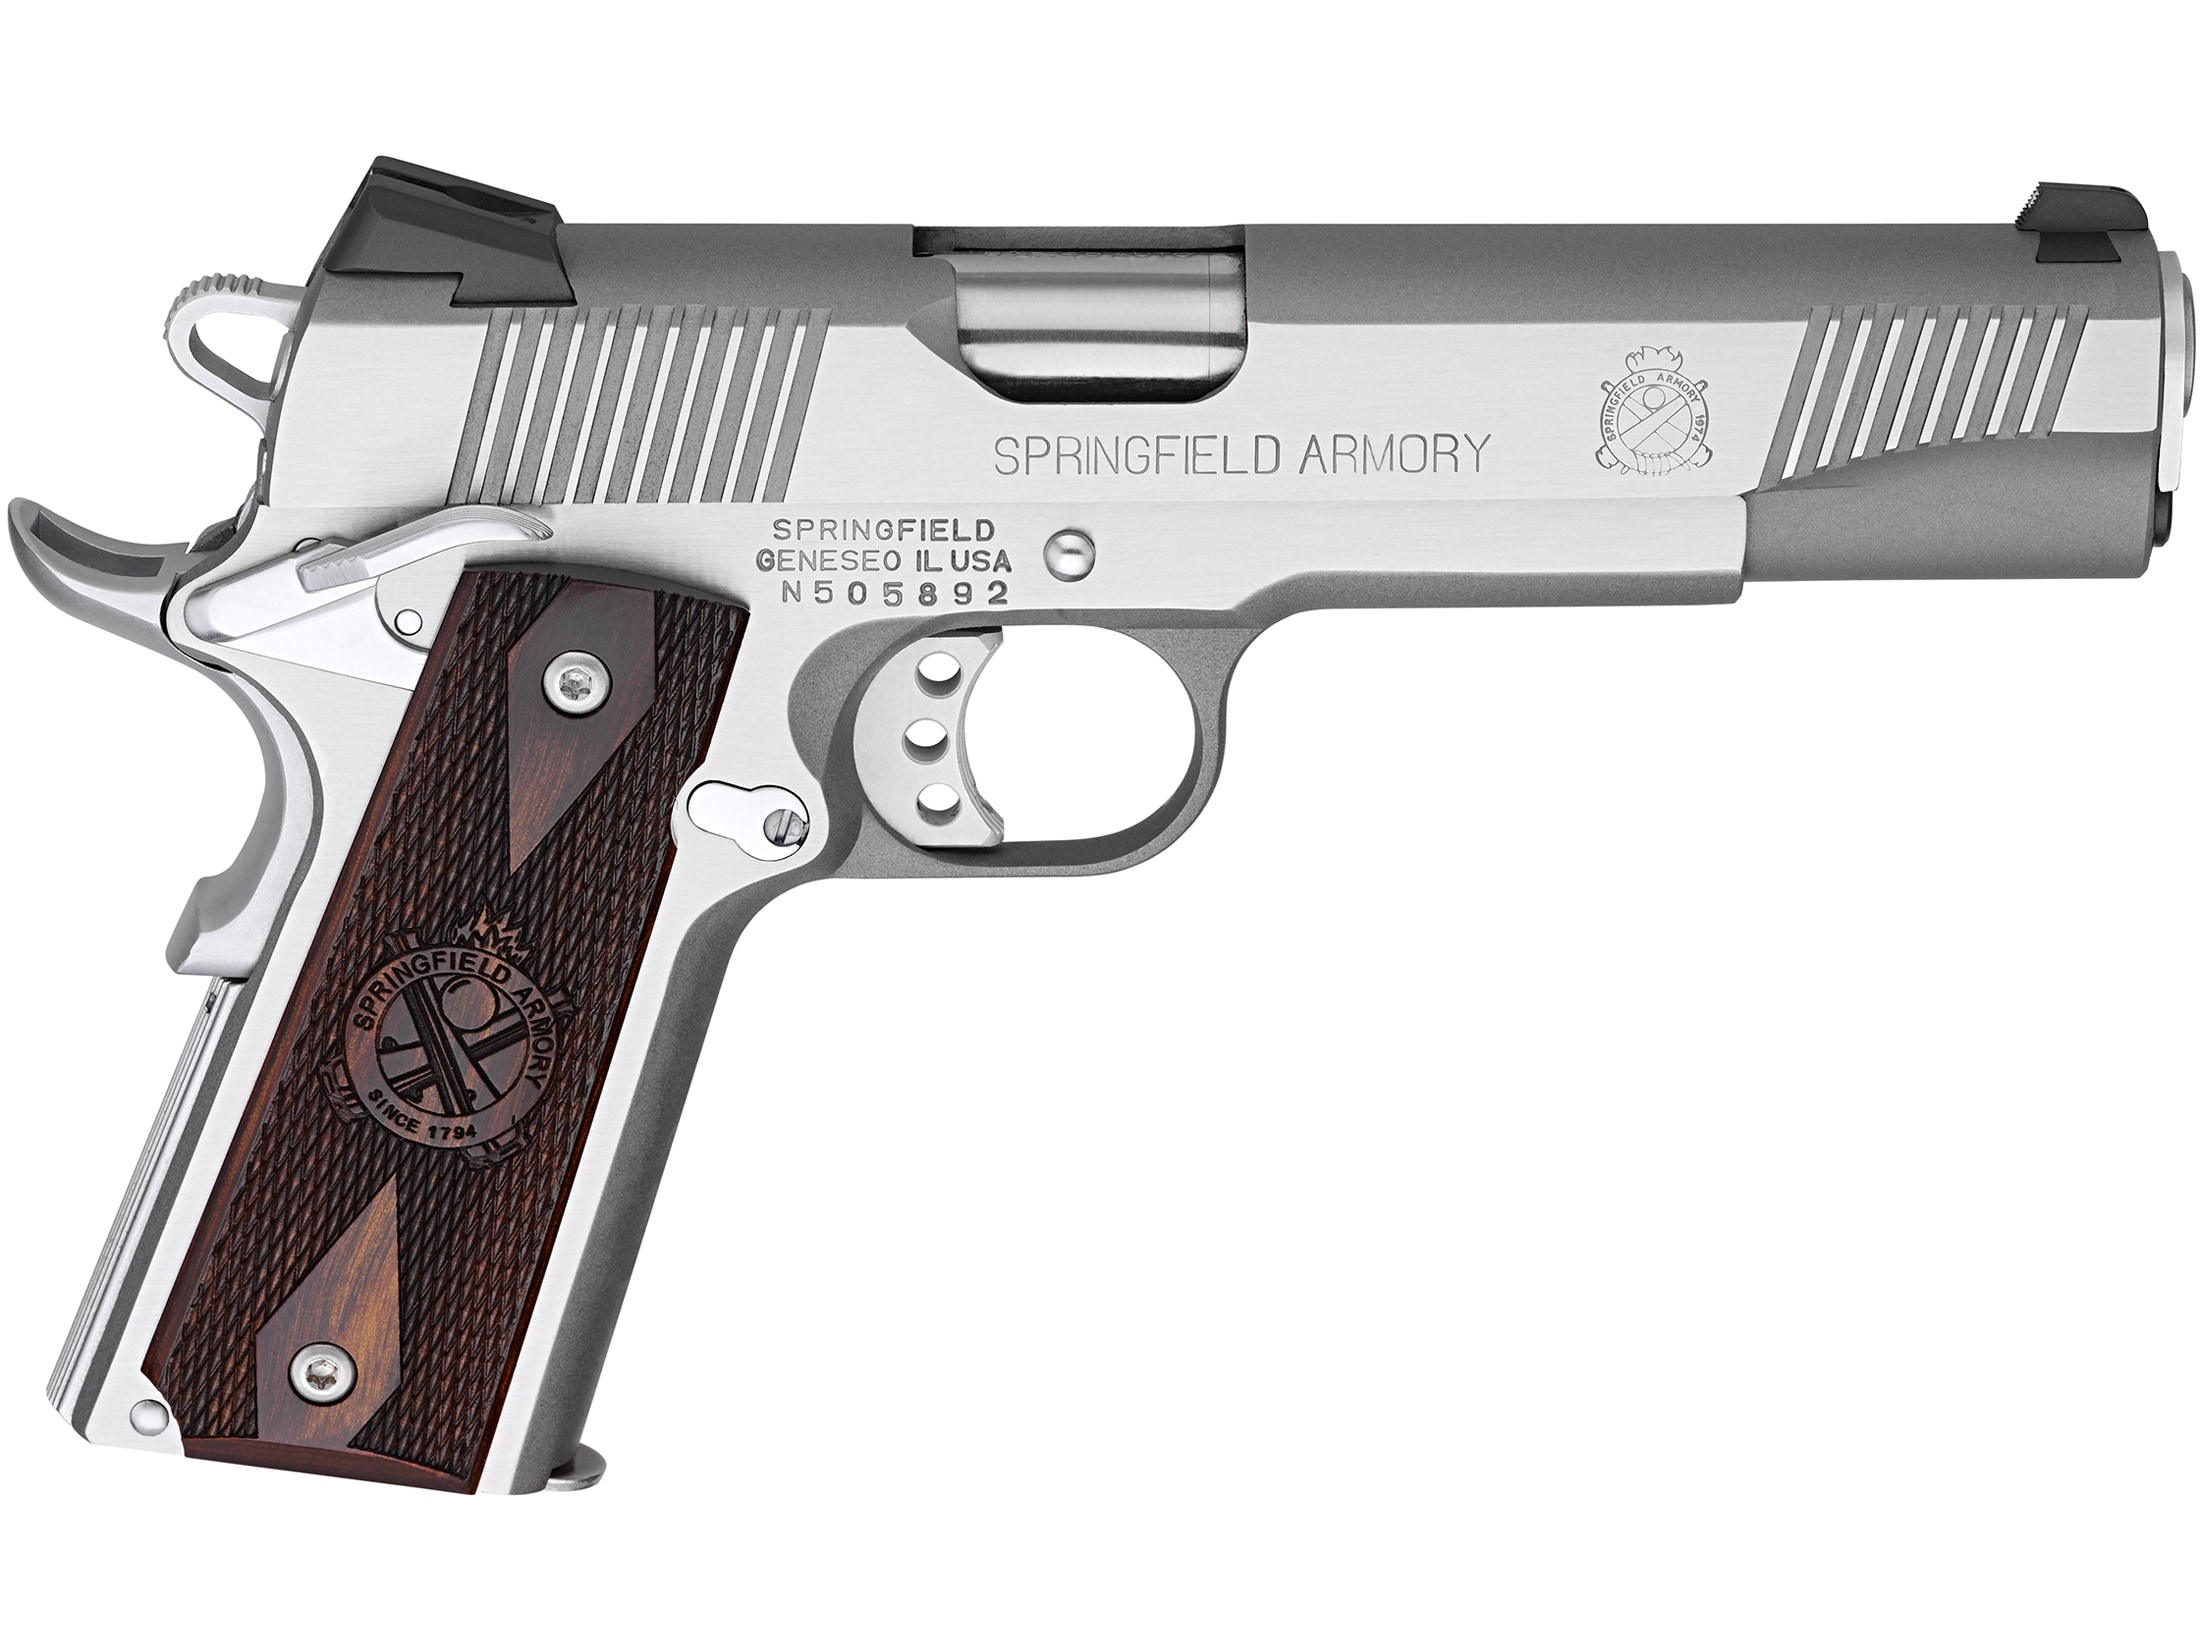 Image of Springfield Armory 1911 Loaded Pistol 45 ACP 5" Barrel 7 Round Stainless and Cocobolo